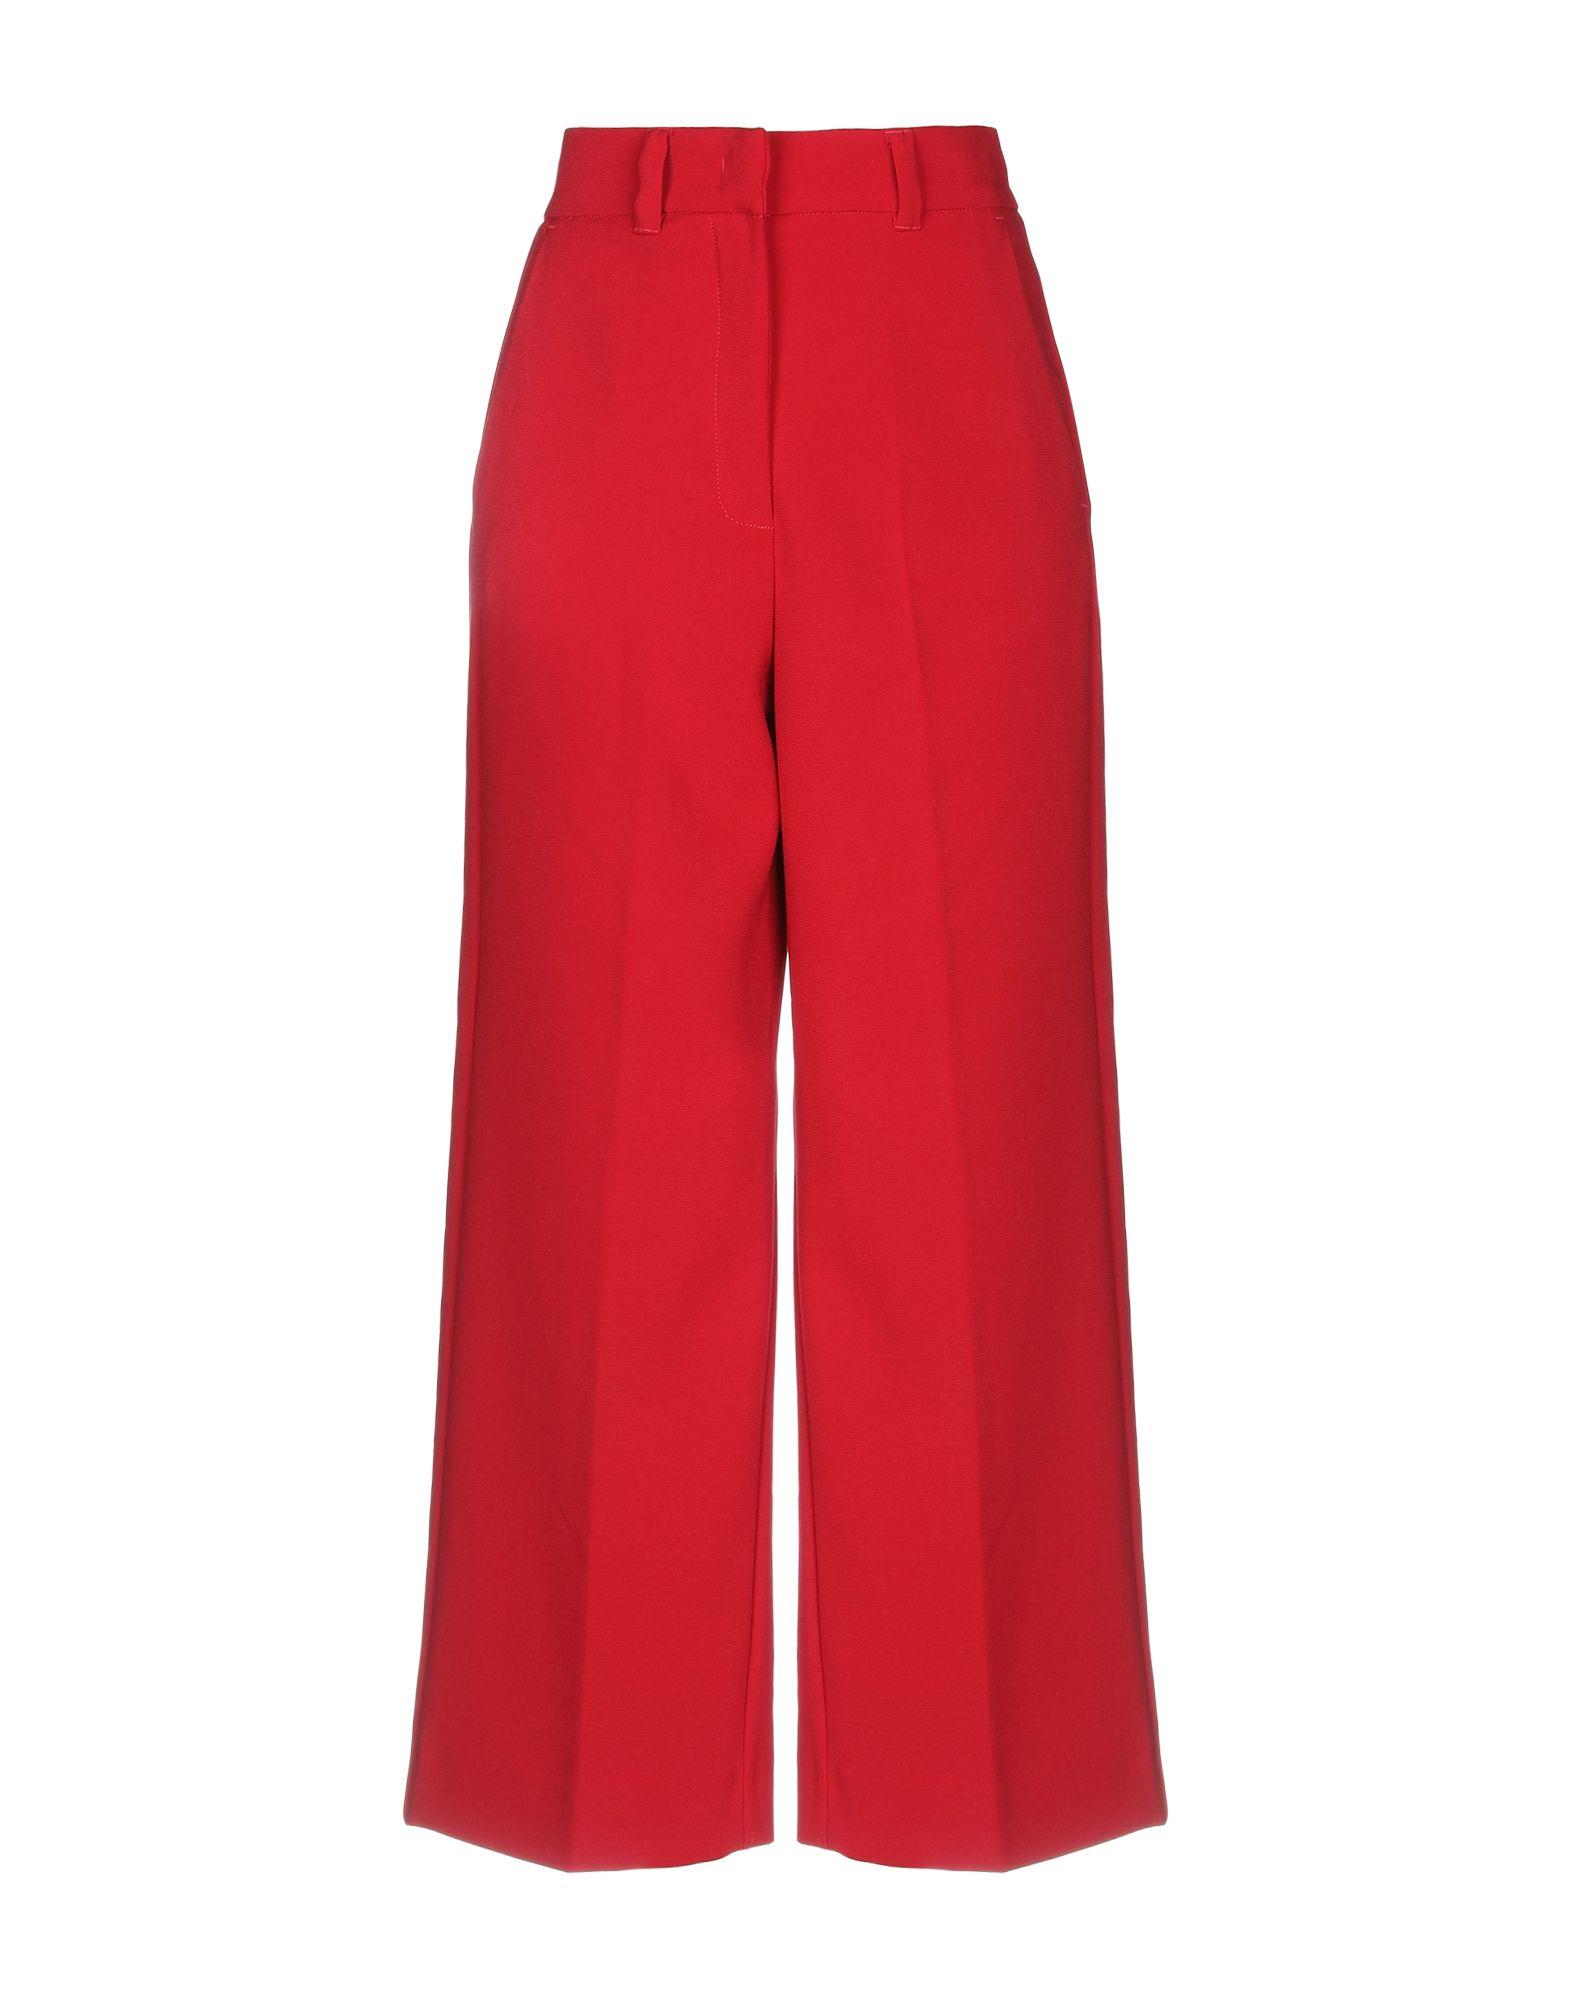 Marella Synthetic Casual Pants in Red - Lyst